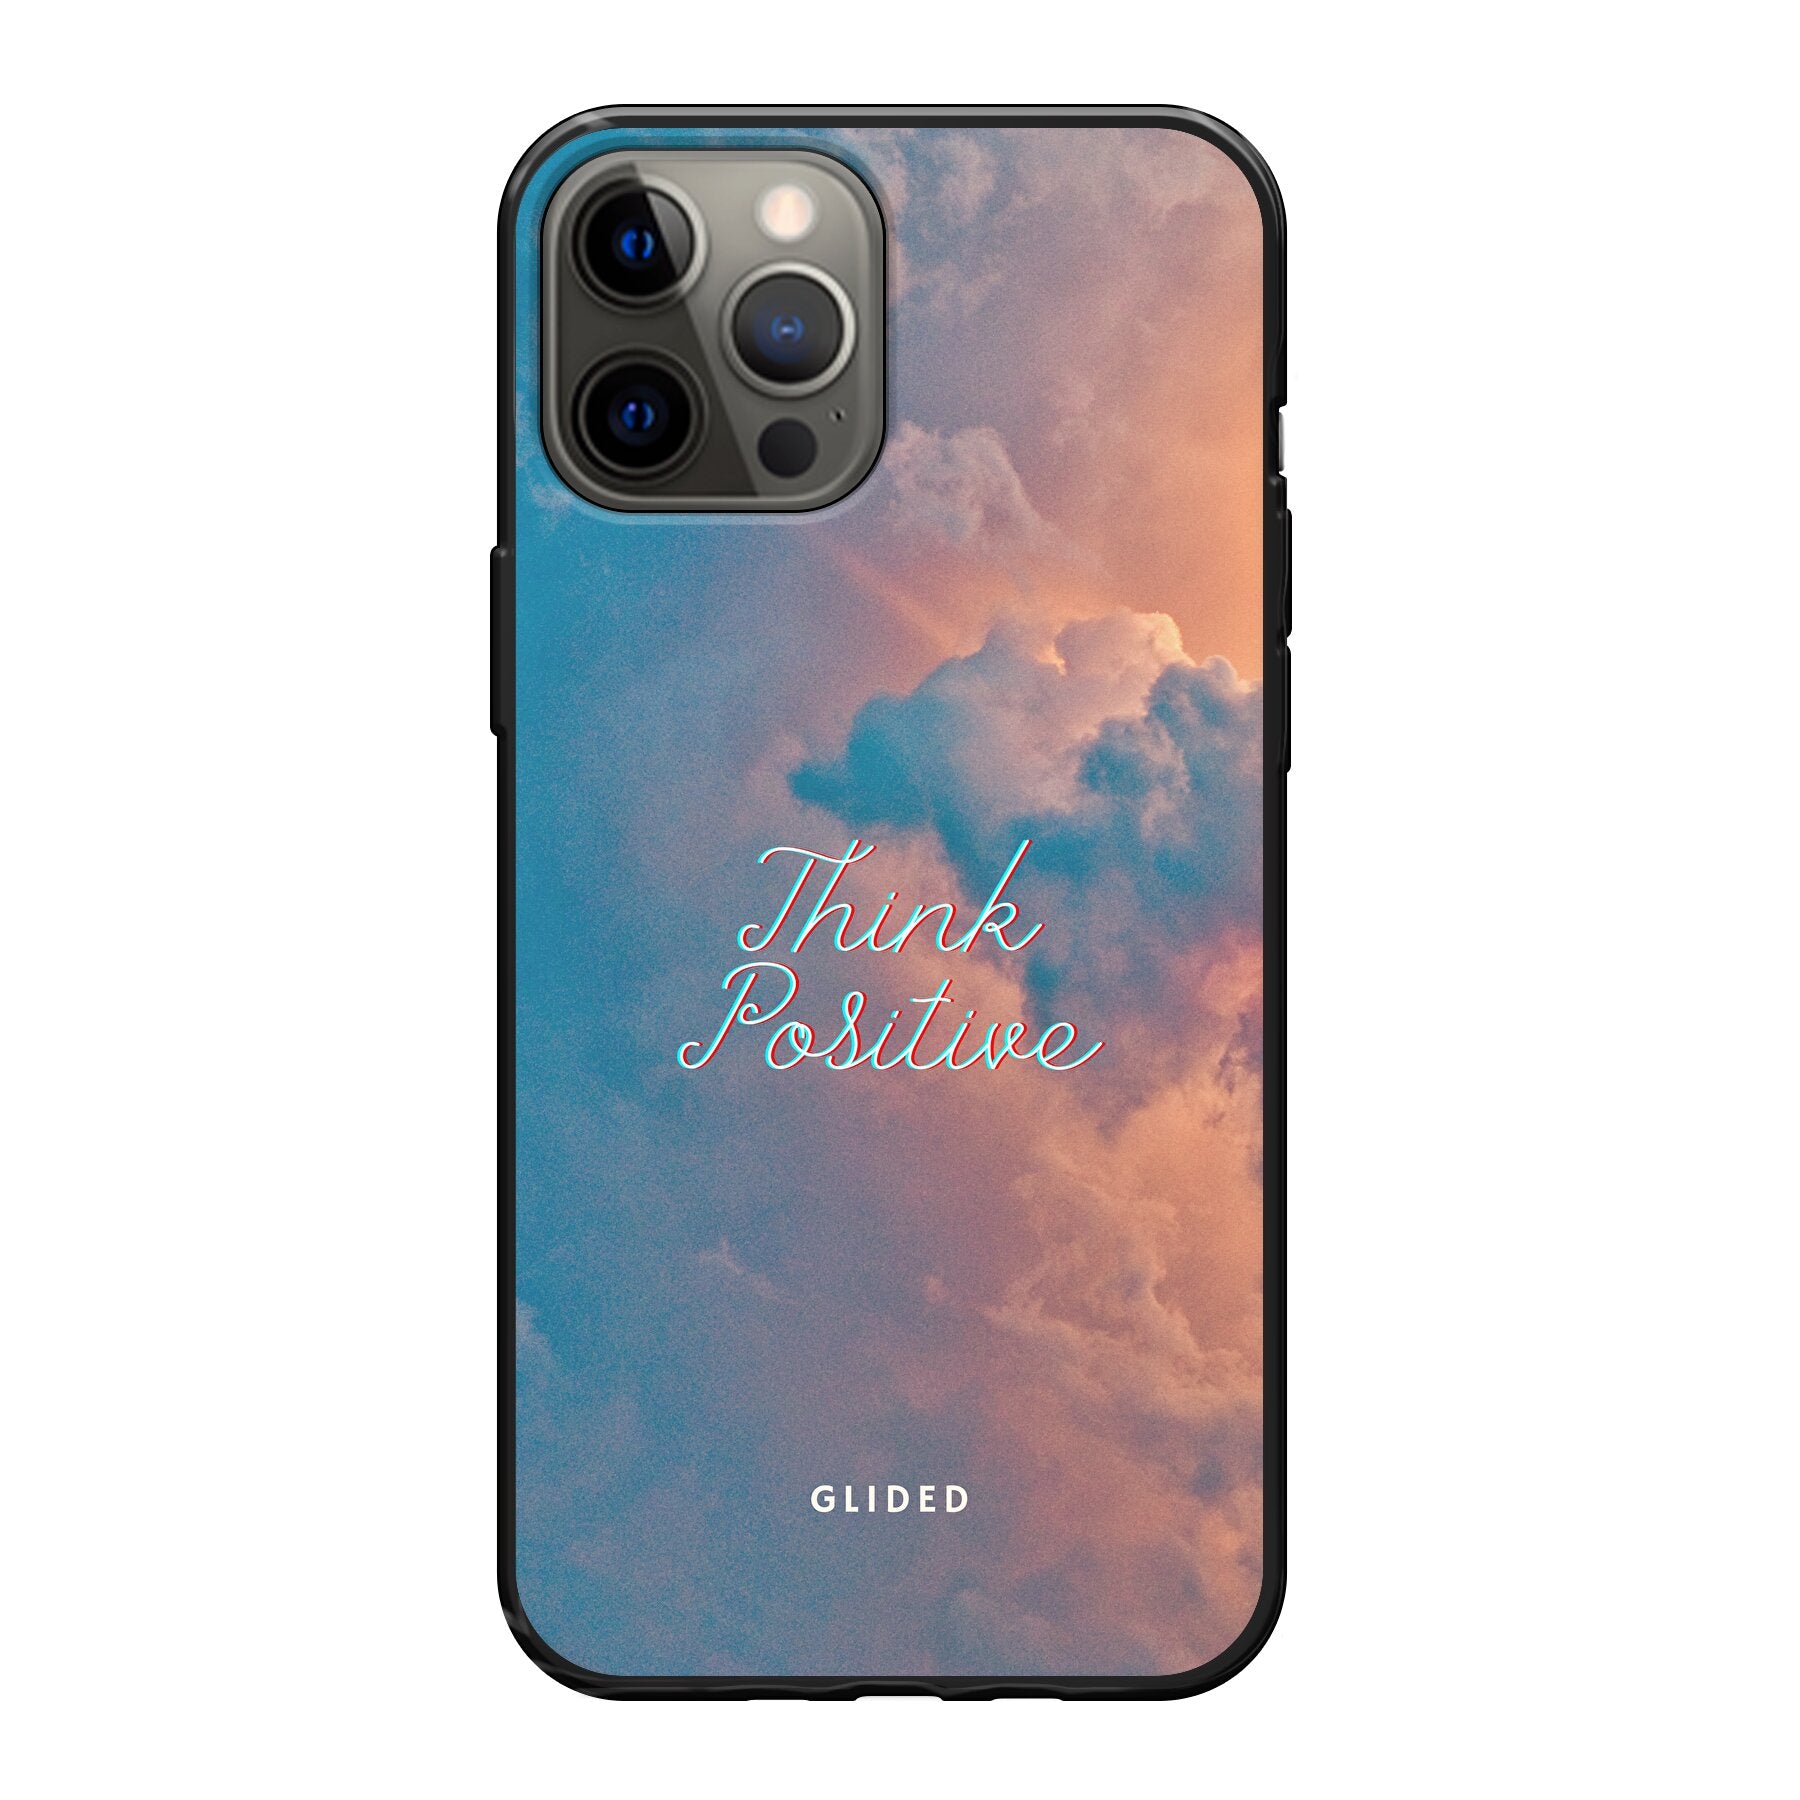 Think positive - iPhone 12 Pro Max Handyhülle Soft case